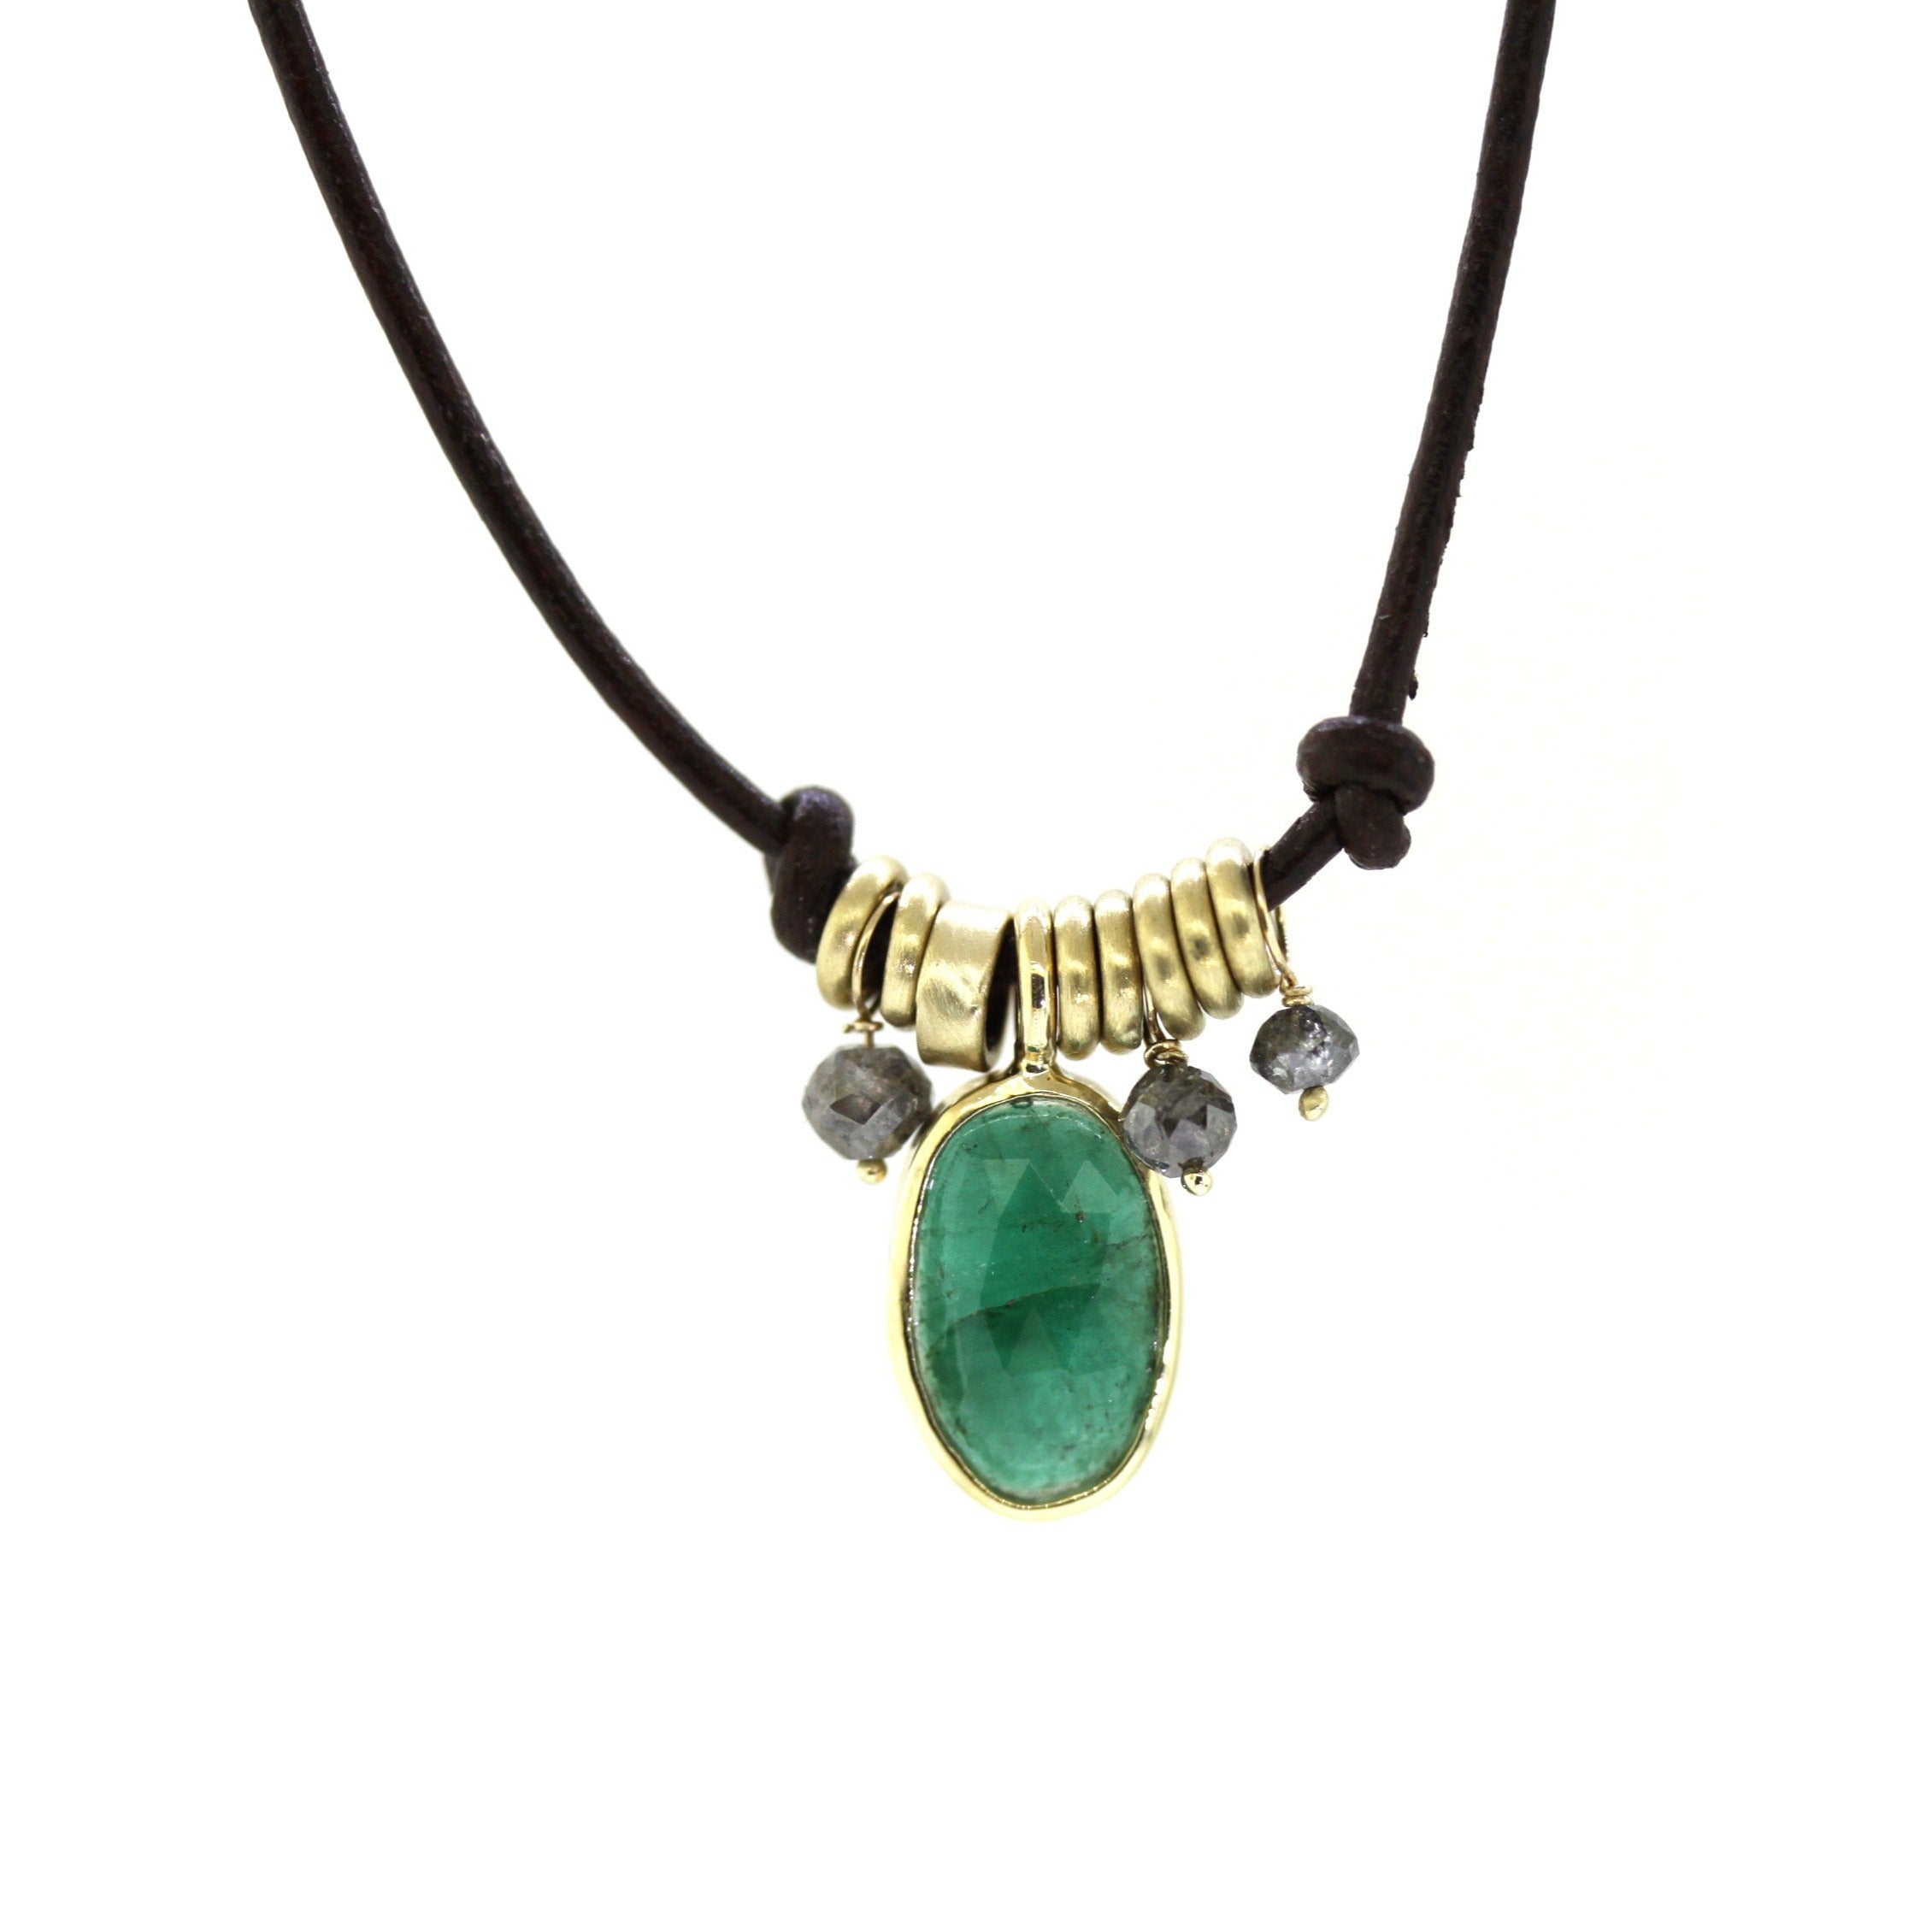 Emerald & Salt and Pepper Dangle Charm Necklace